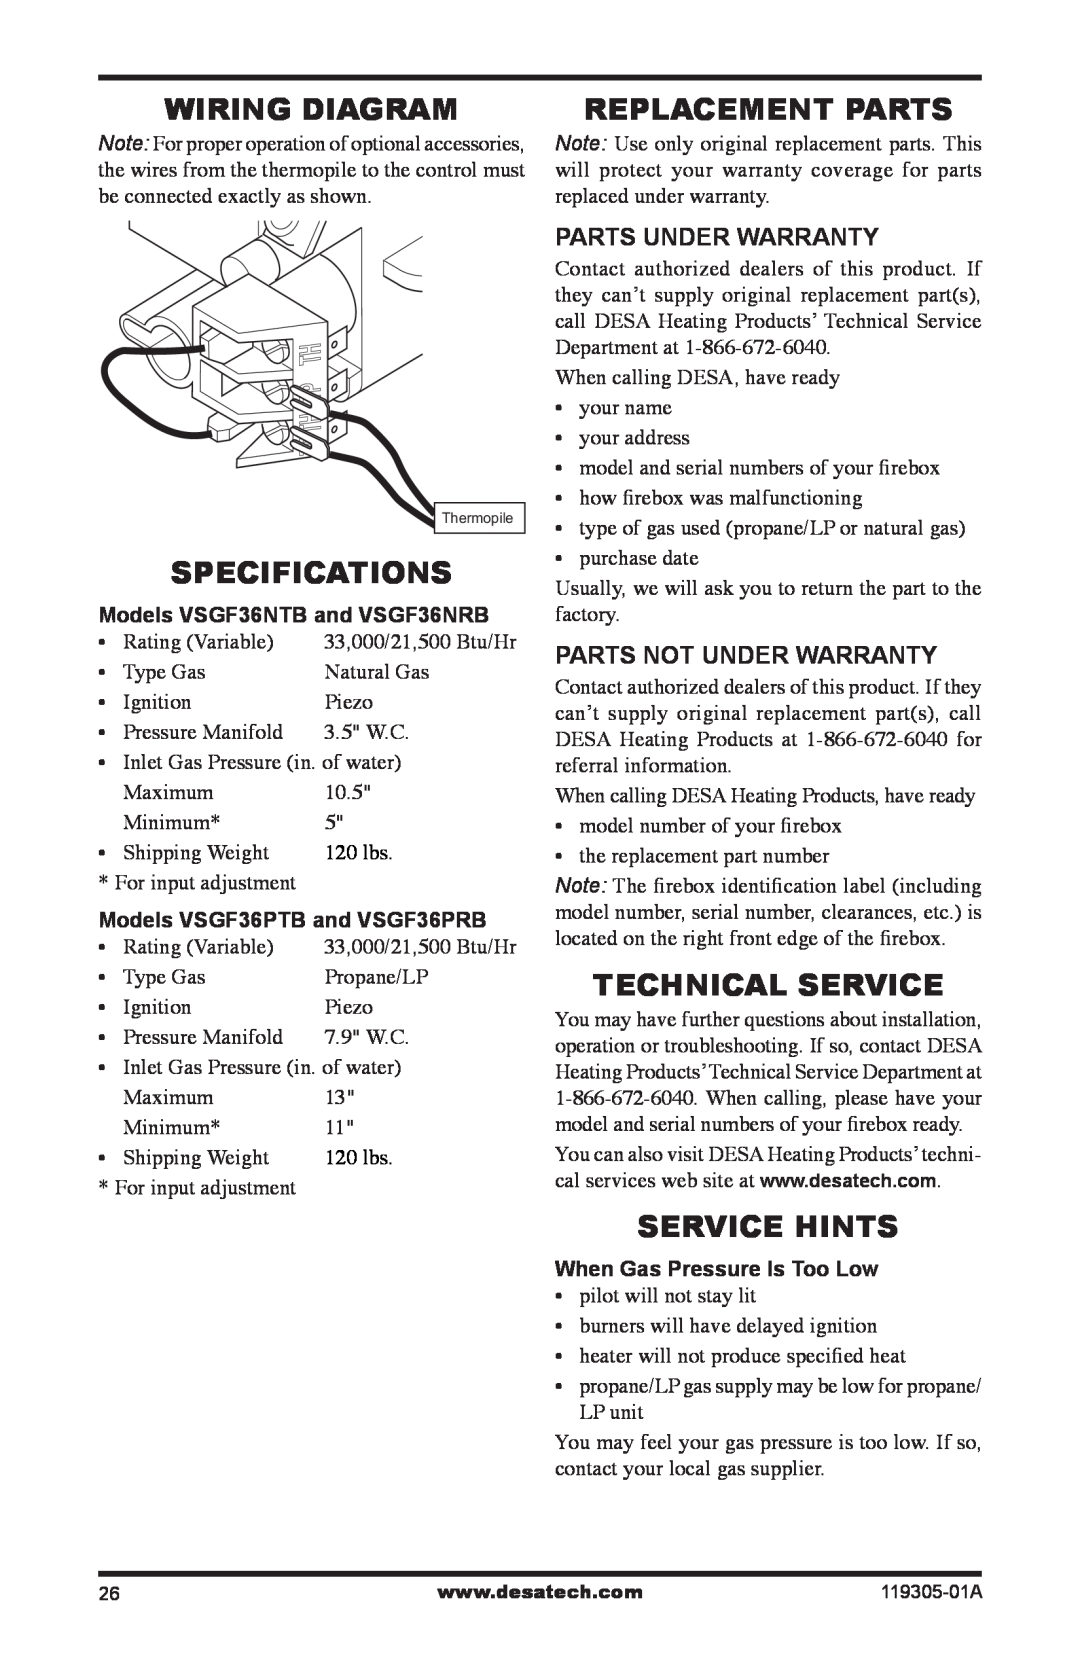 Desa VSGF36NRB Wiring Diagram, Replacement Parts, Specifications, Technical Service, Service Hints, Parts Under Warranty 